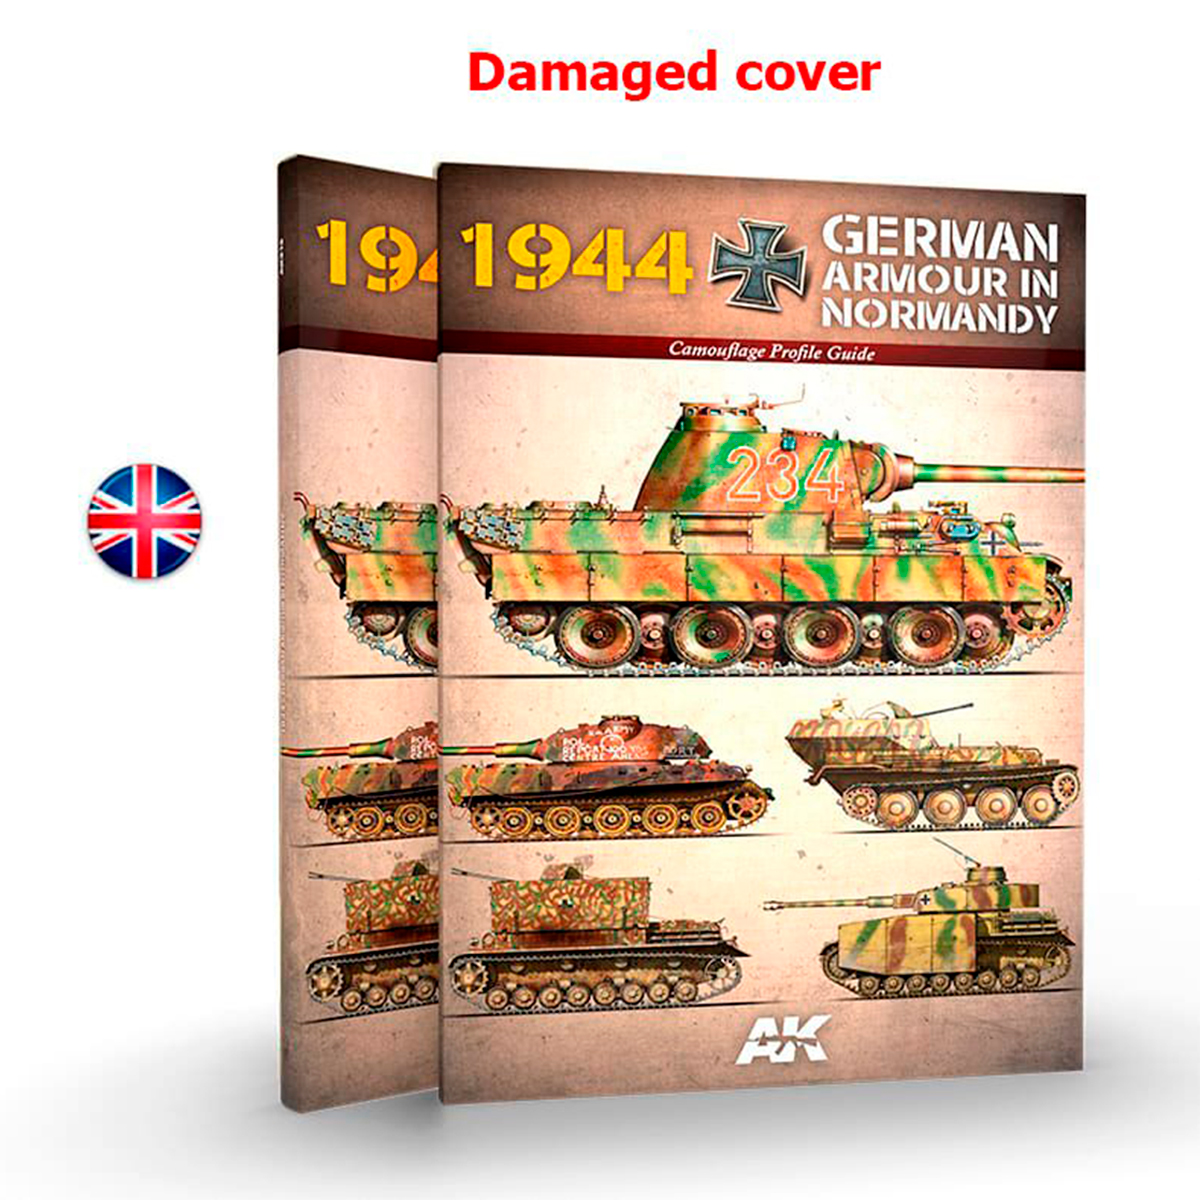 1944 GERMAN ARMOUR IN NORMANDY – CAMOUFLAGE PROFILE GUIDE (Damaged cover)